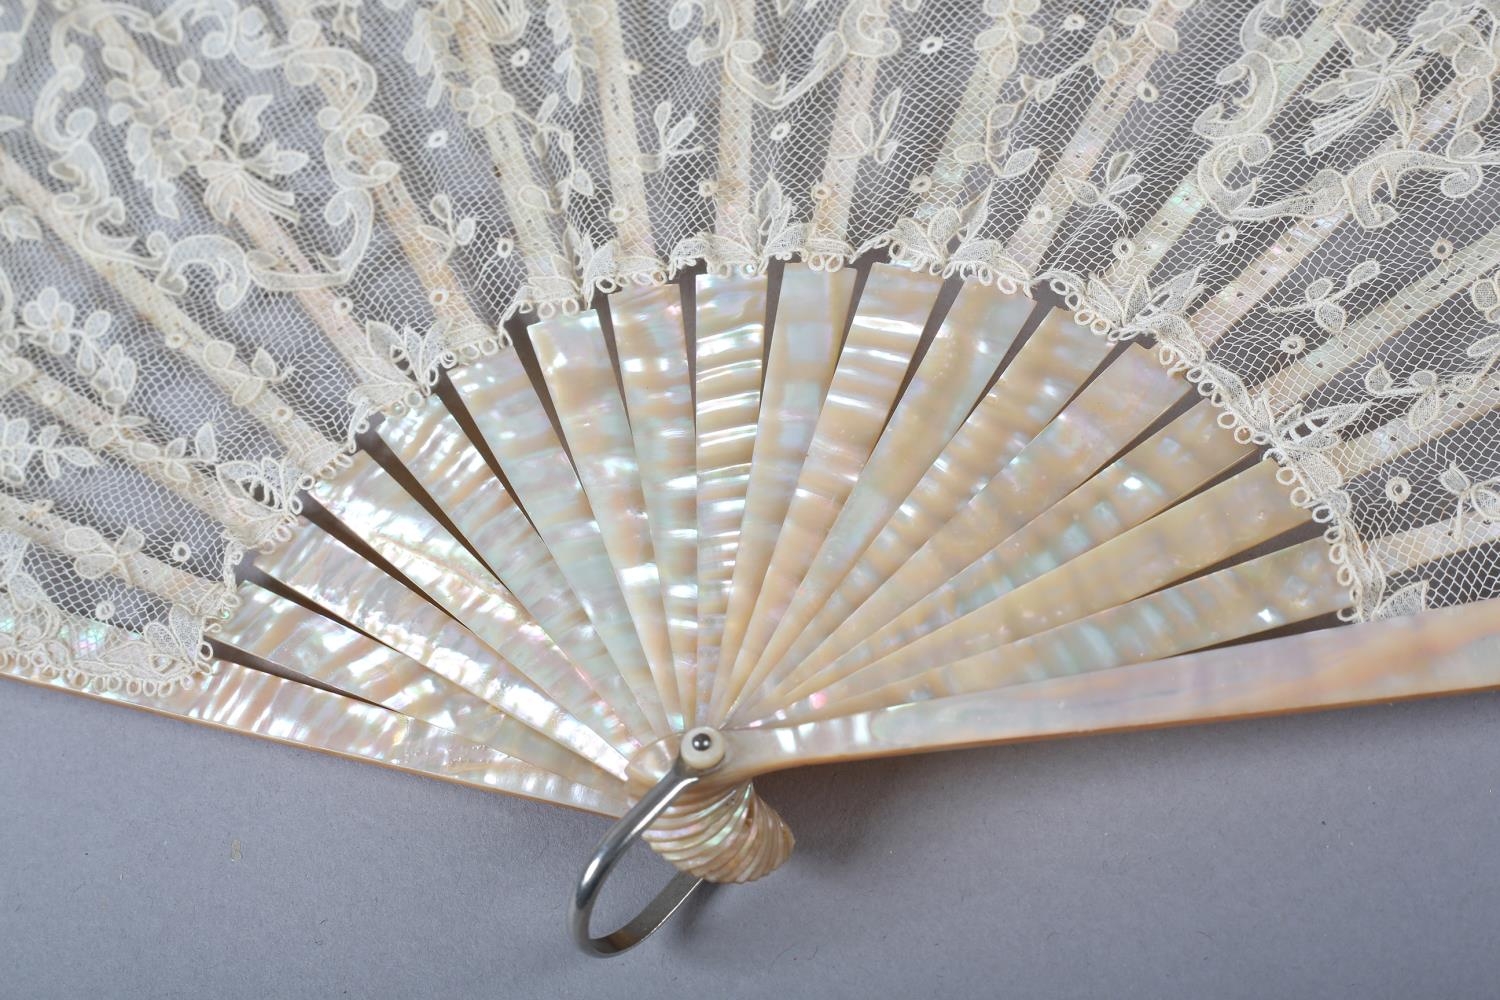 A folding fan c 1900 with pink mother of pearl monture, continuing onto the ribs, the lace leaf of a - Image 2 of 5